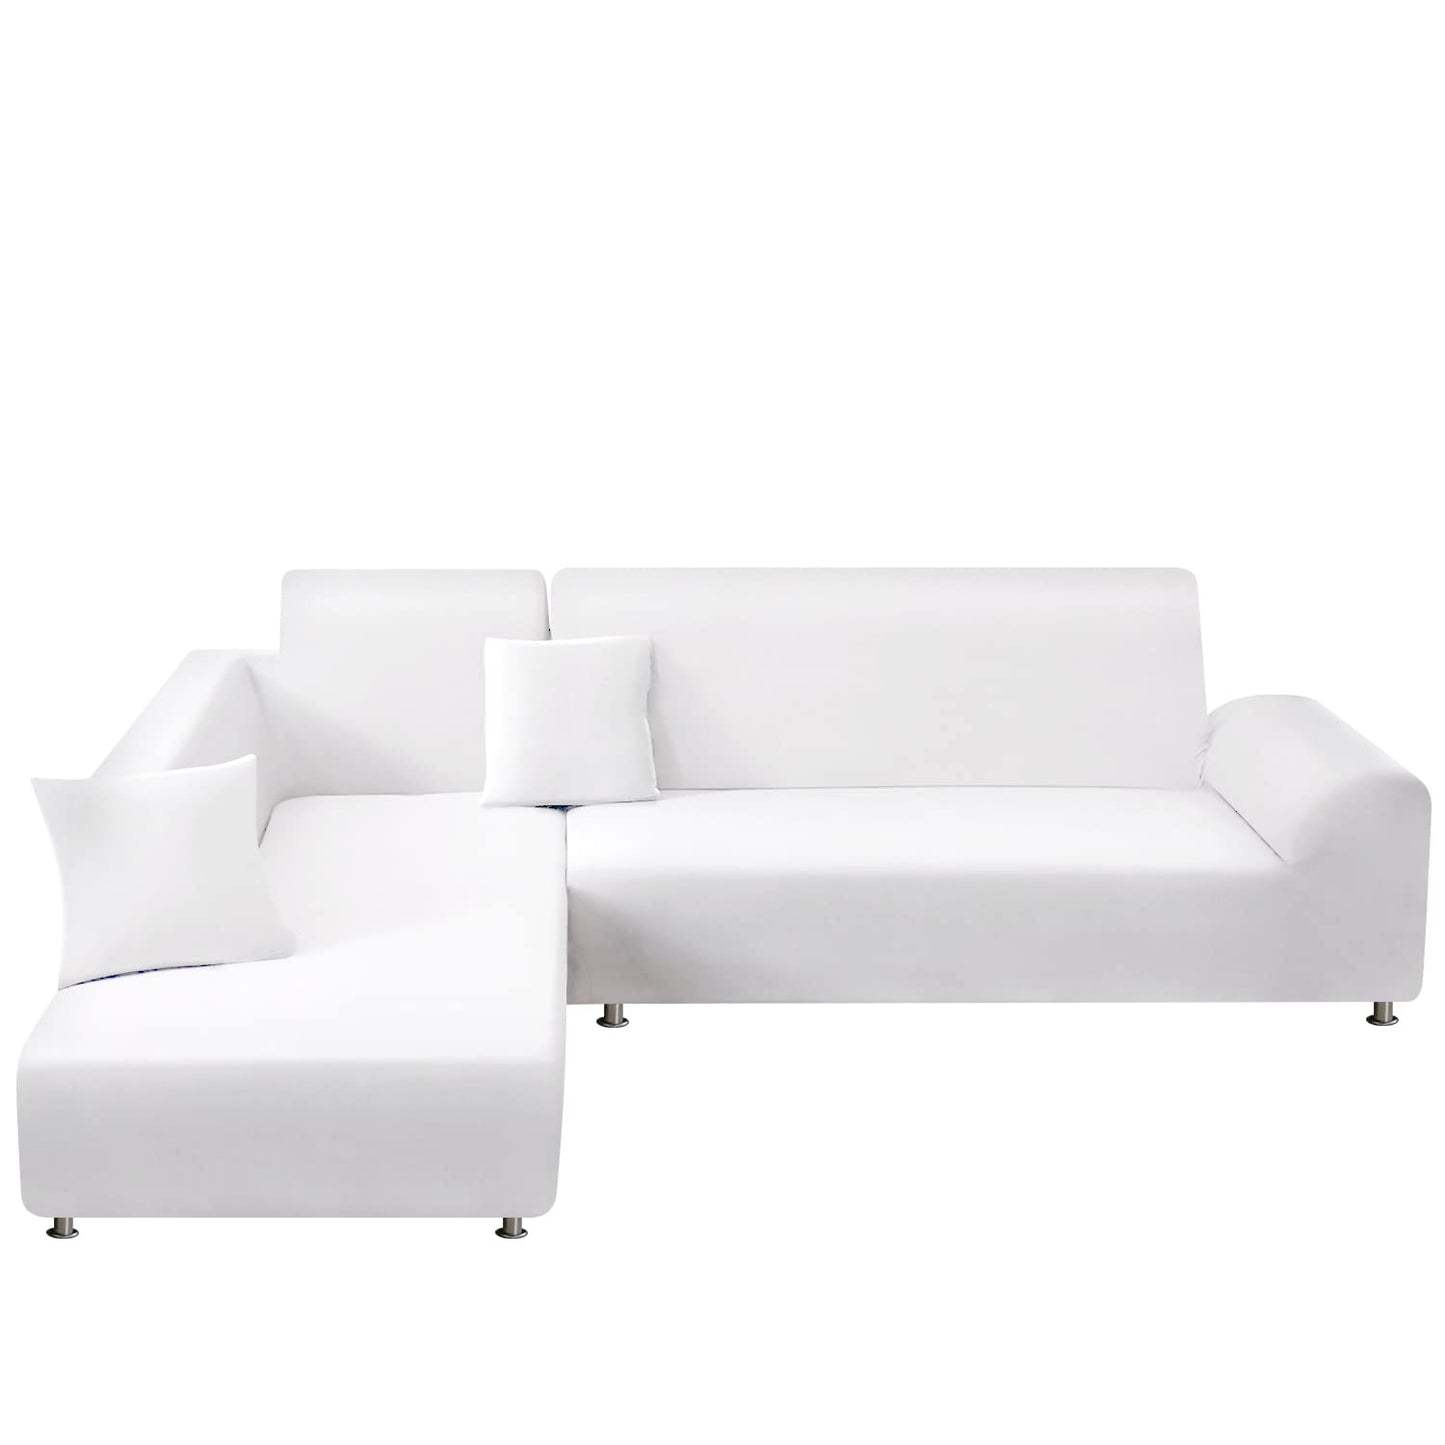 Sectional Couch Covers 2pcs L-Shaped Sofa Covers - TAOCOCO